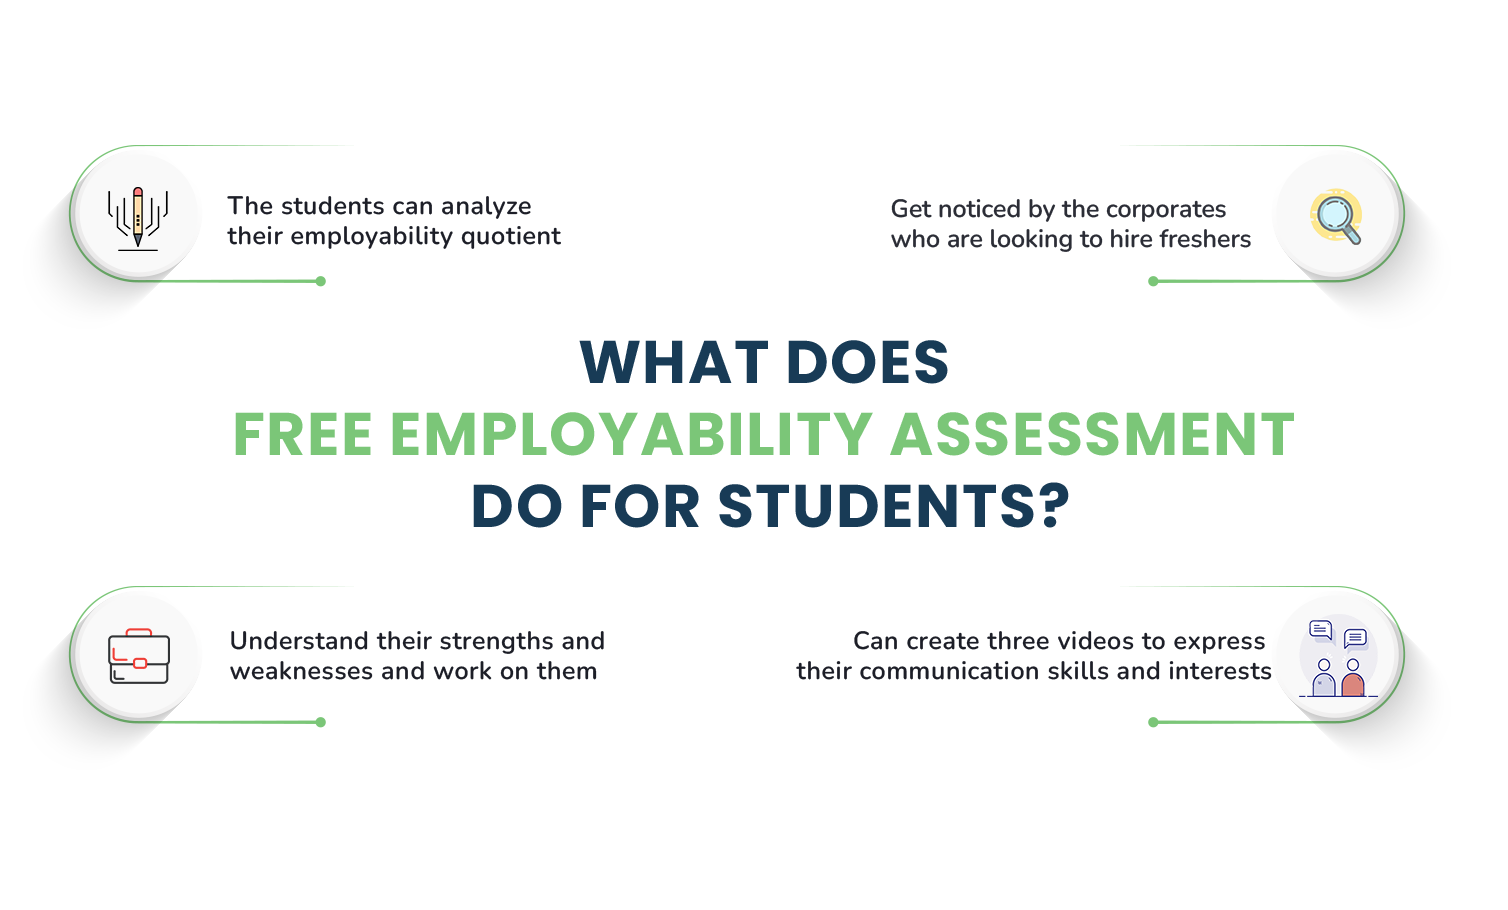 HireMee's Free Employability Assessment